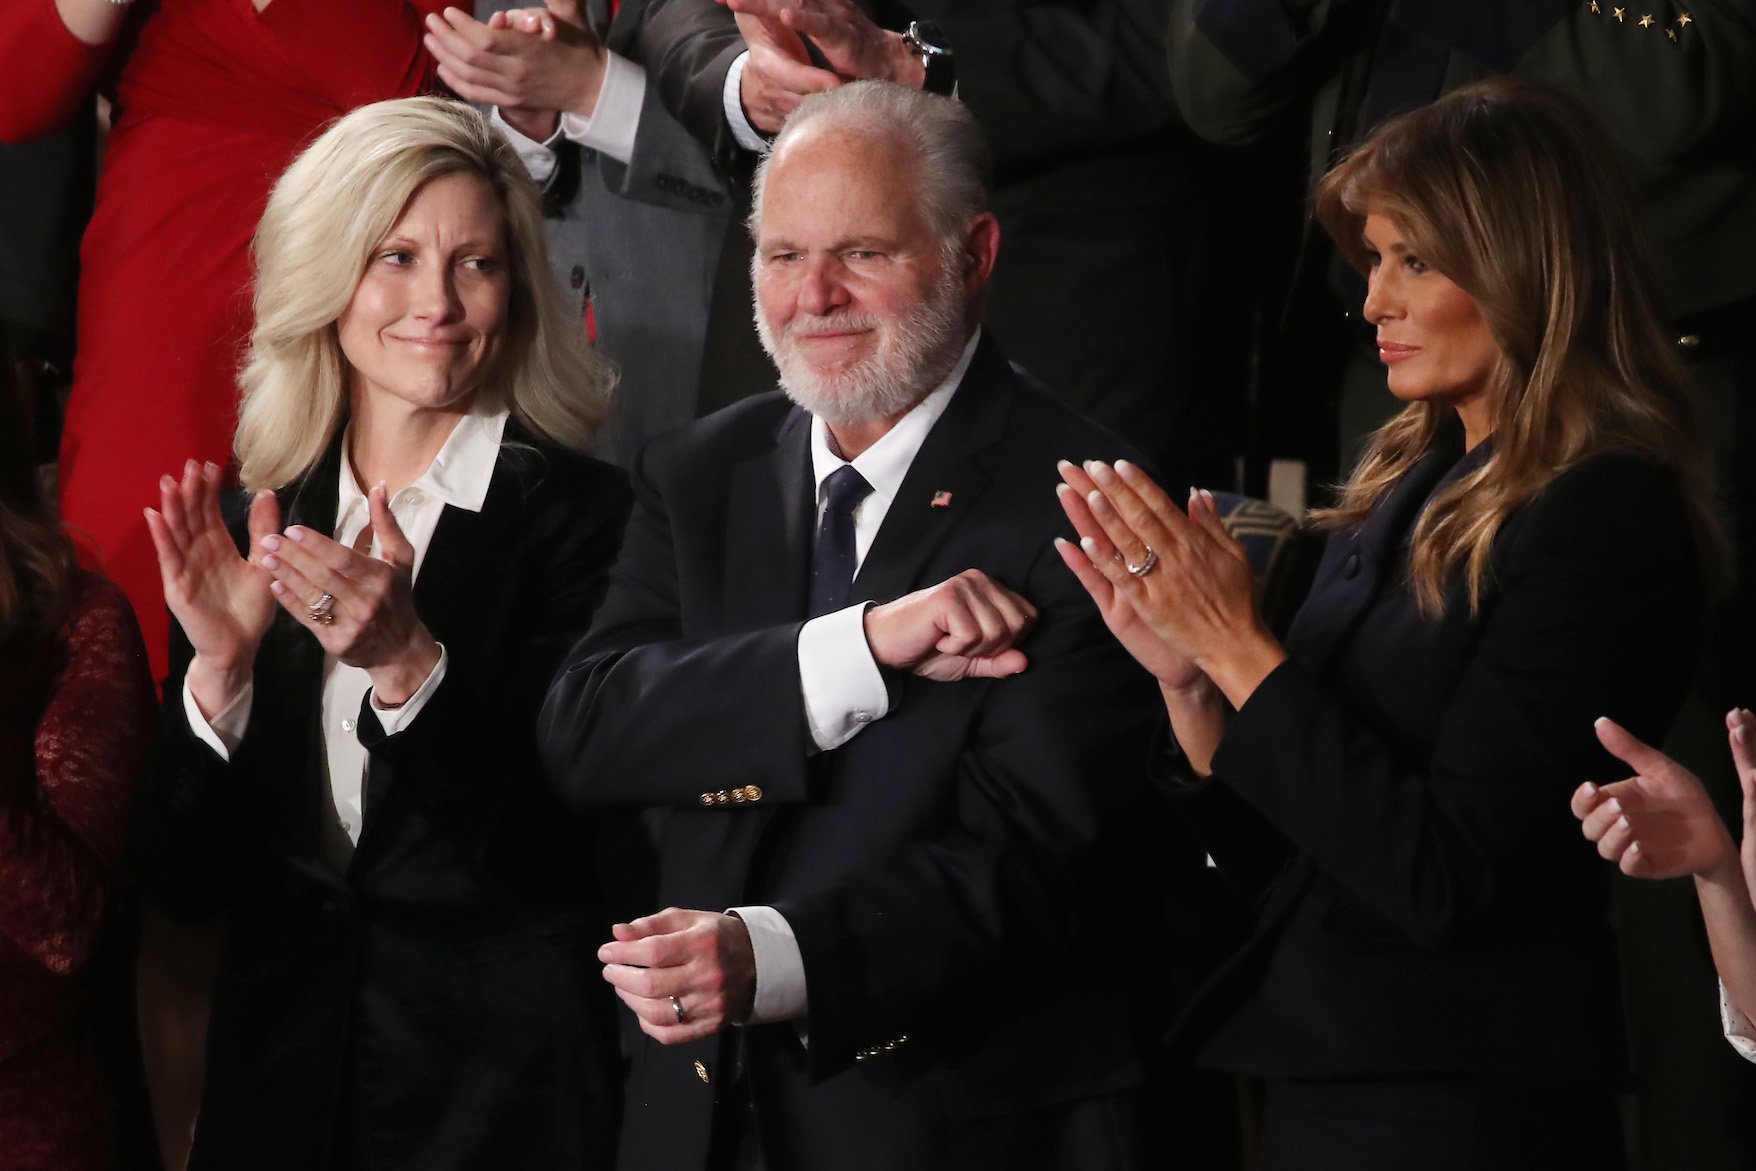 Rush Limbaugh and wife Kathryn Adams Limbaugh standing next to Melania Trump at the State of the Union Address